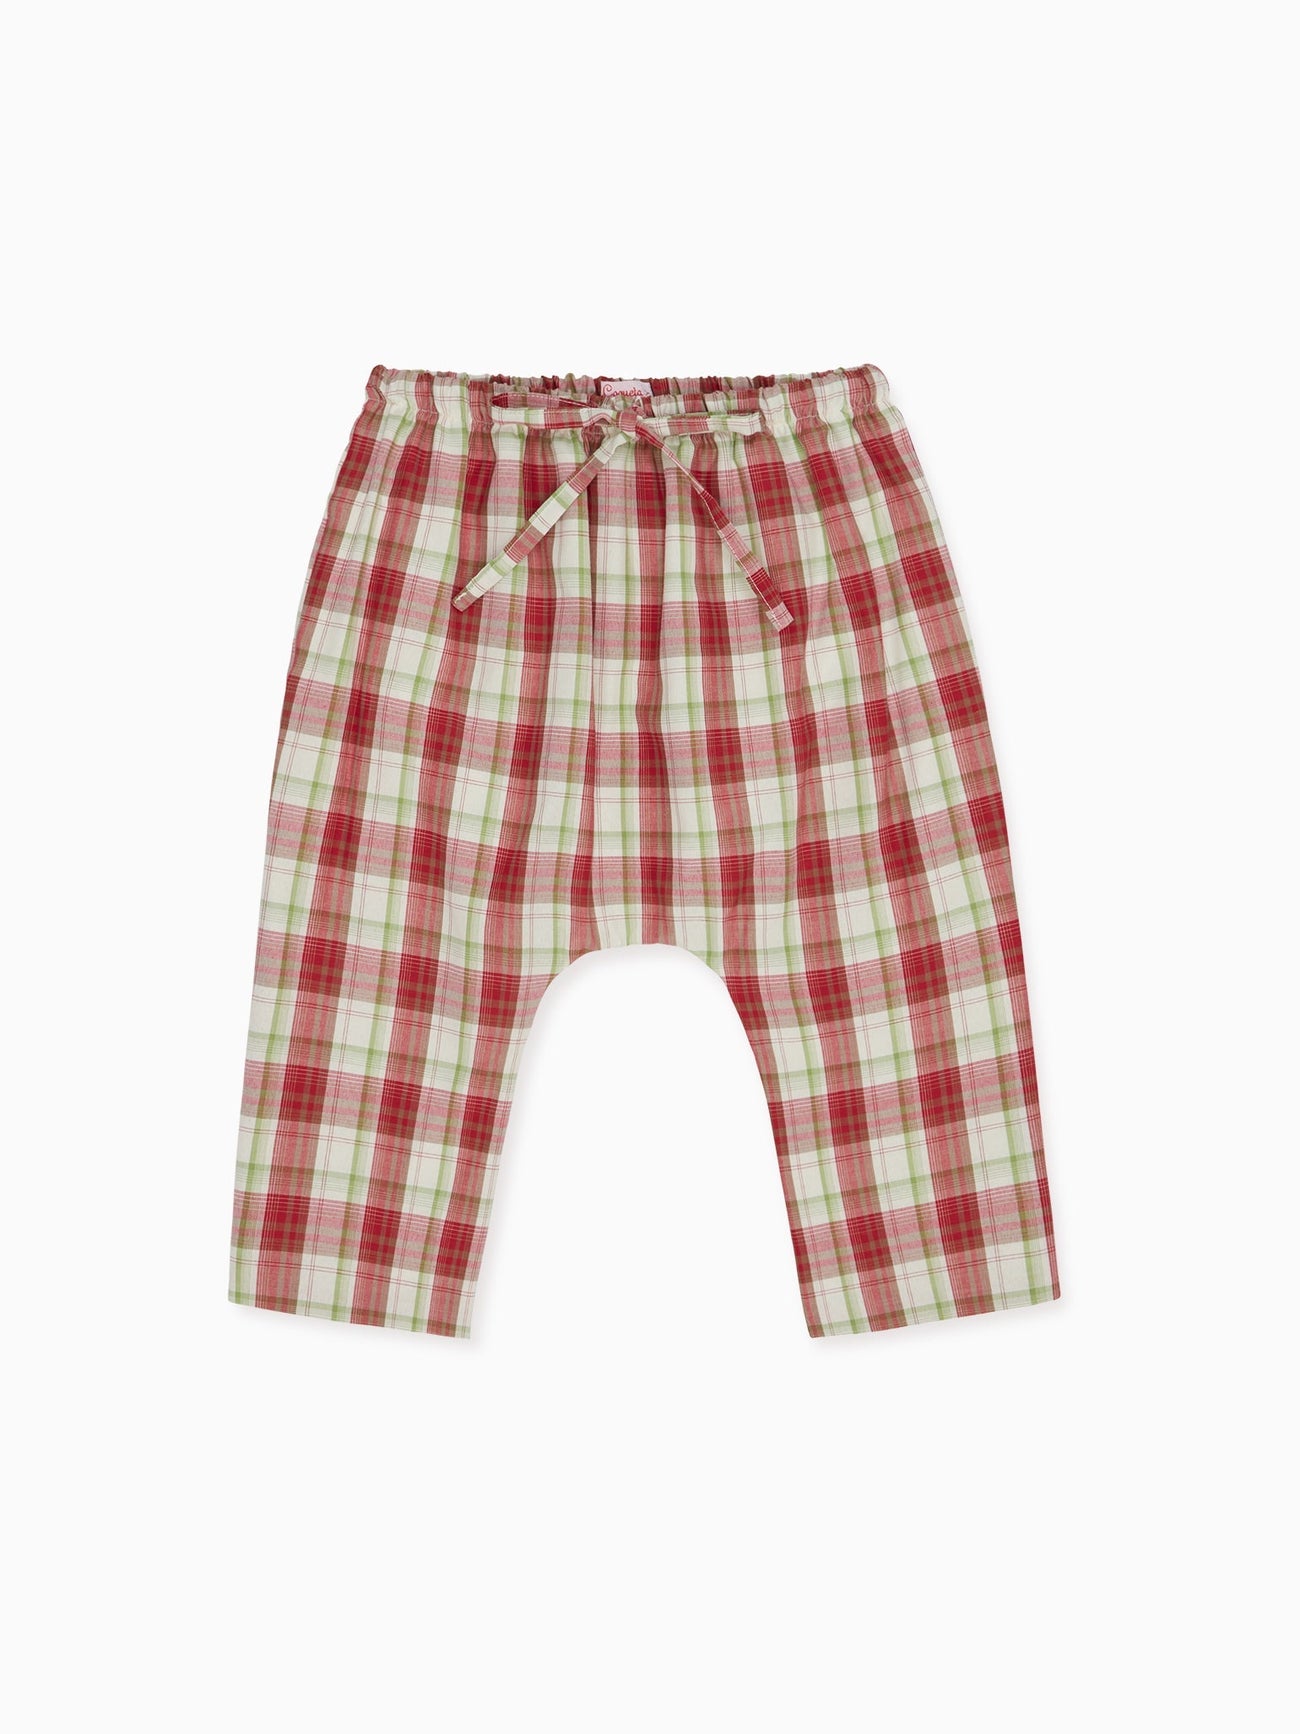 Red Check Alex Baby Pants